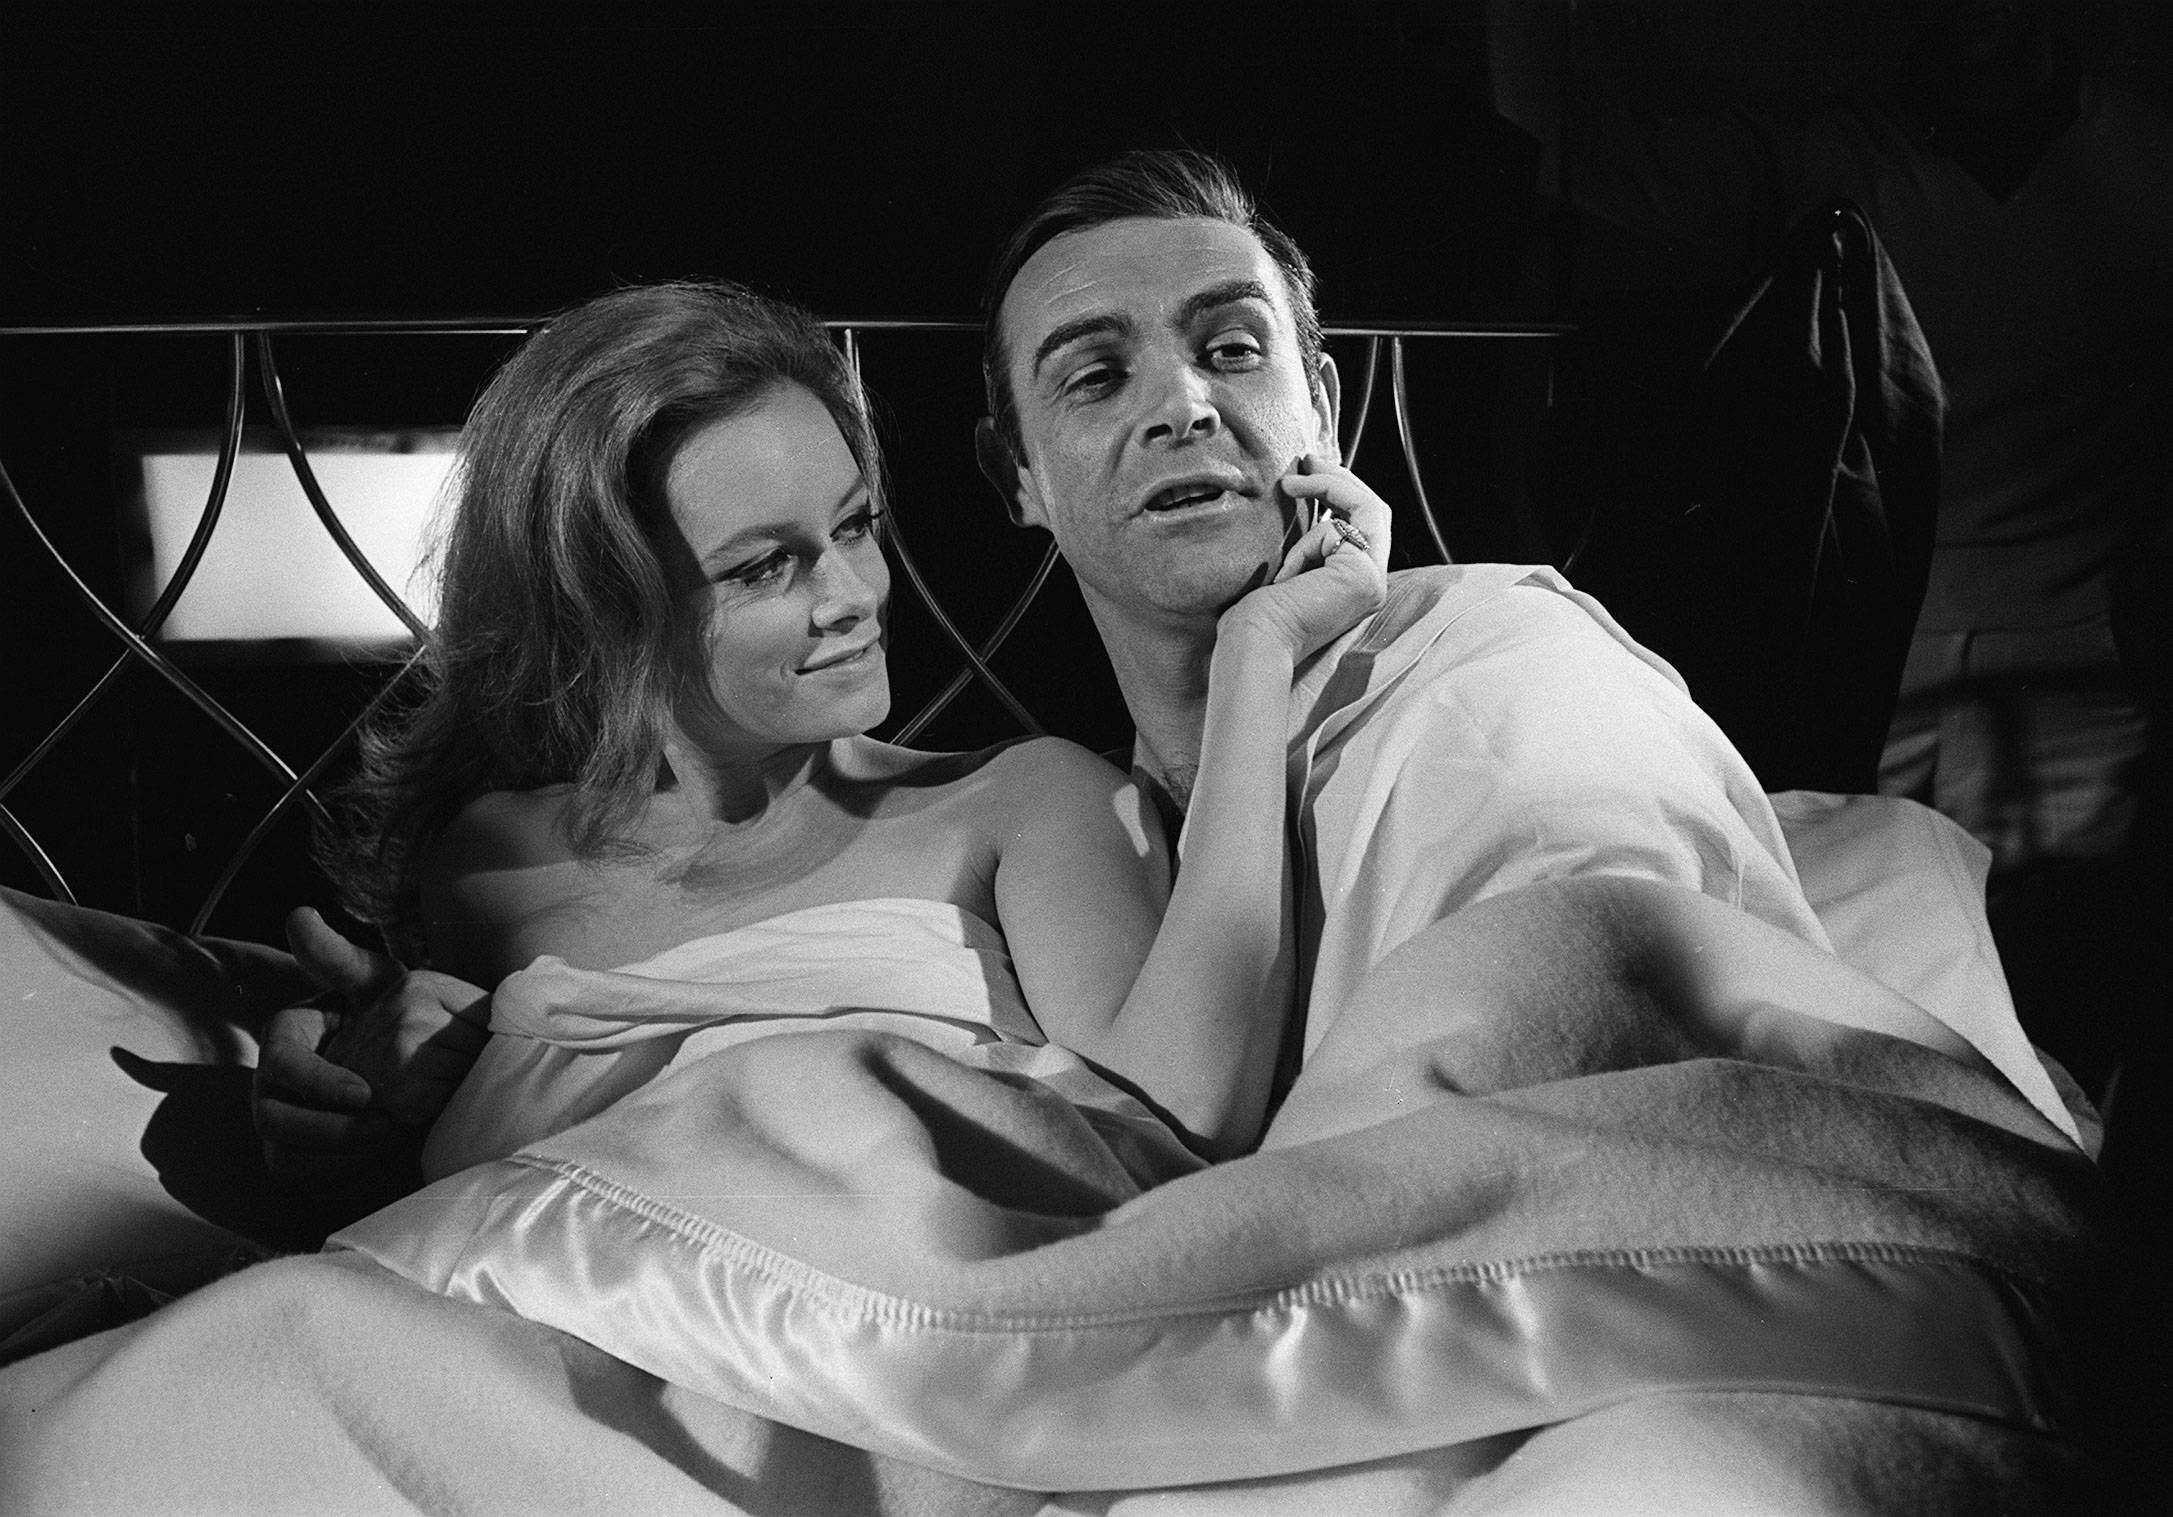 Luciana Paluzzi and Sean Connery on the set of "Thunderball" at Pinewood Studios in March 1965. | Source: Getty Images